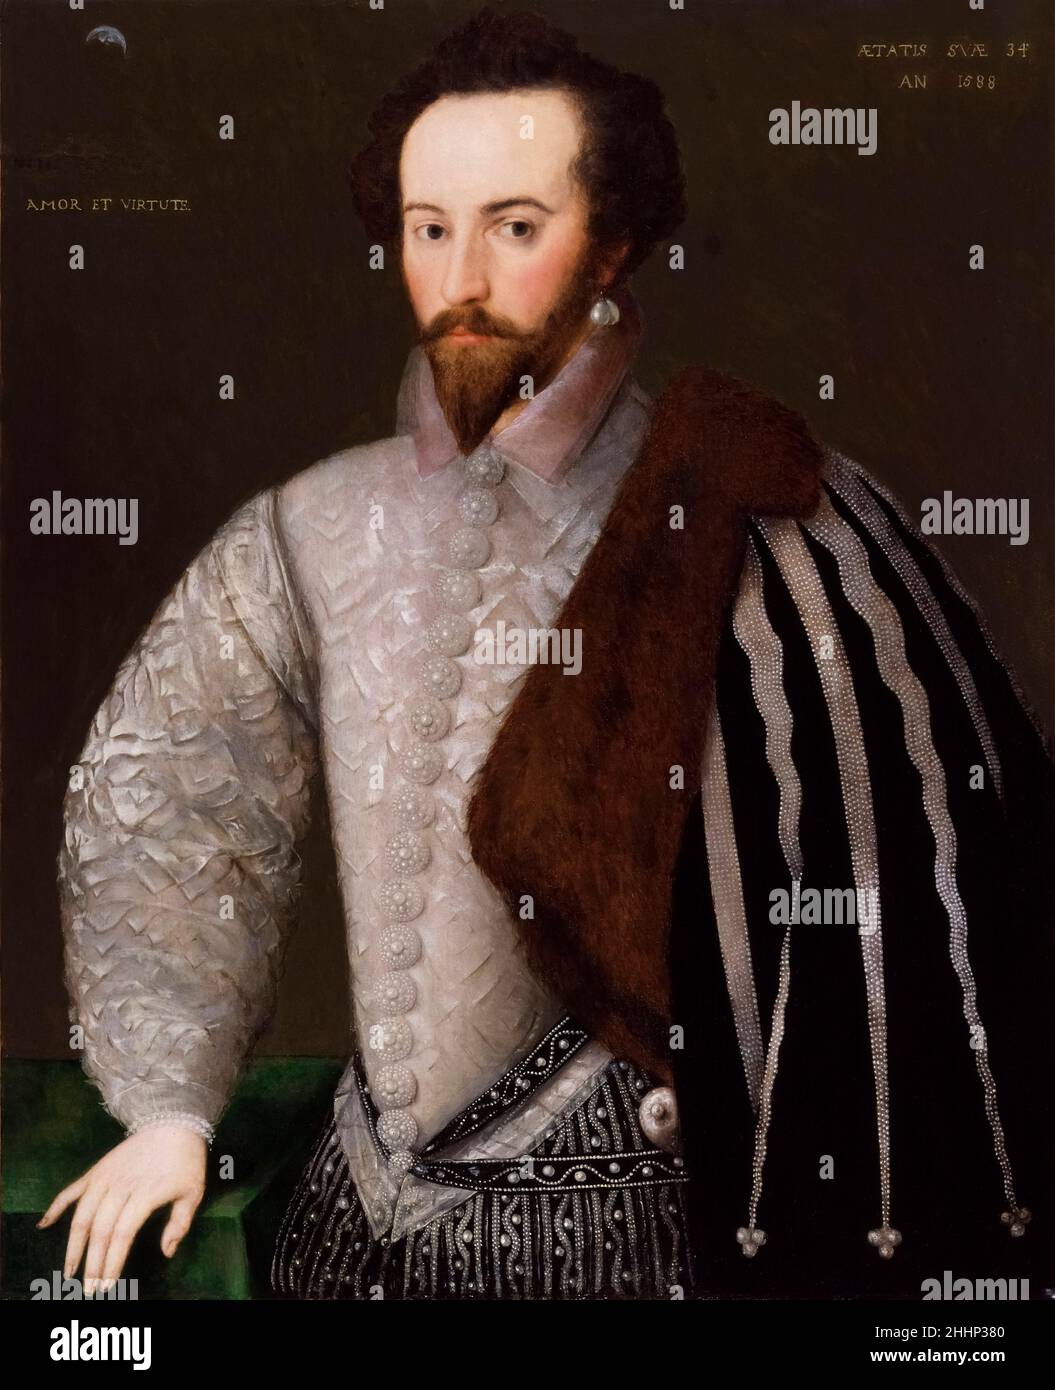 Sir Walter Ralegh (c. 1552 – 29 October 1618), also spelled Raleigh, was an English statesman, soldier, writer and explorer. One of the most notable figures of the Elizabethan era, he played a leading part in English colonisation of North America, suppressed rebellion in Ireland, helped defend England during the Spanish Armada and held political positions under Elizabeth I. Stock Photo